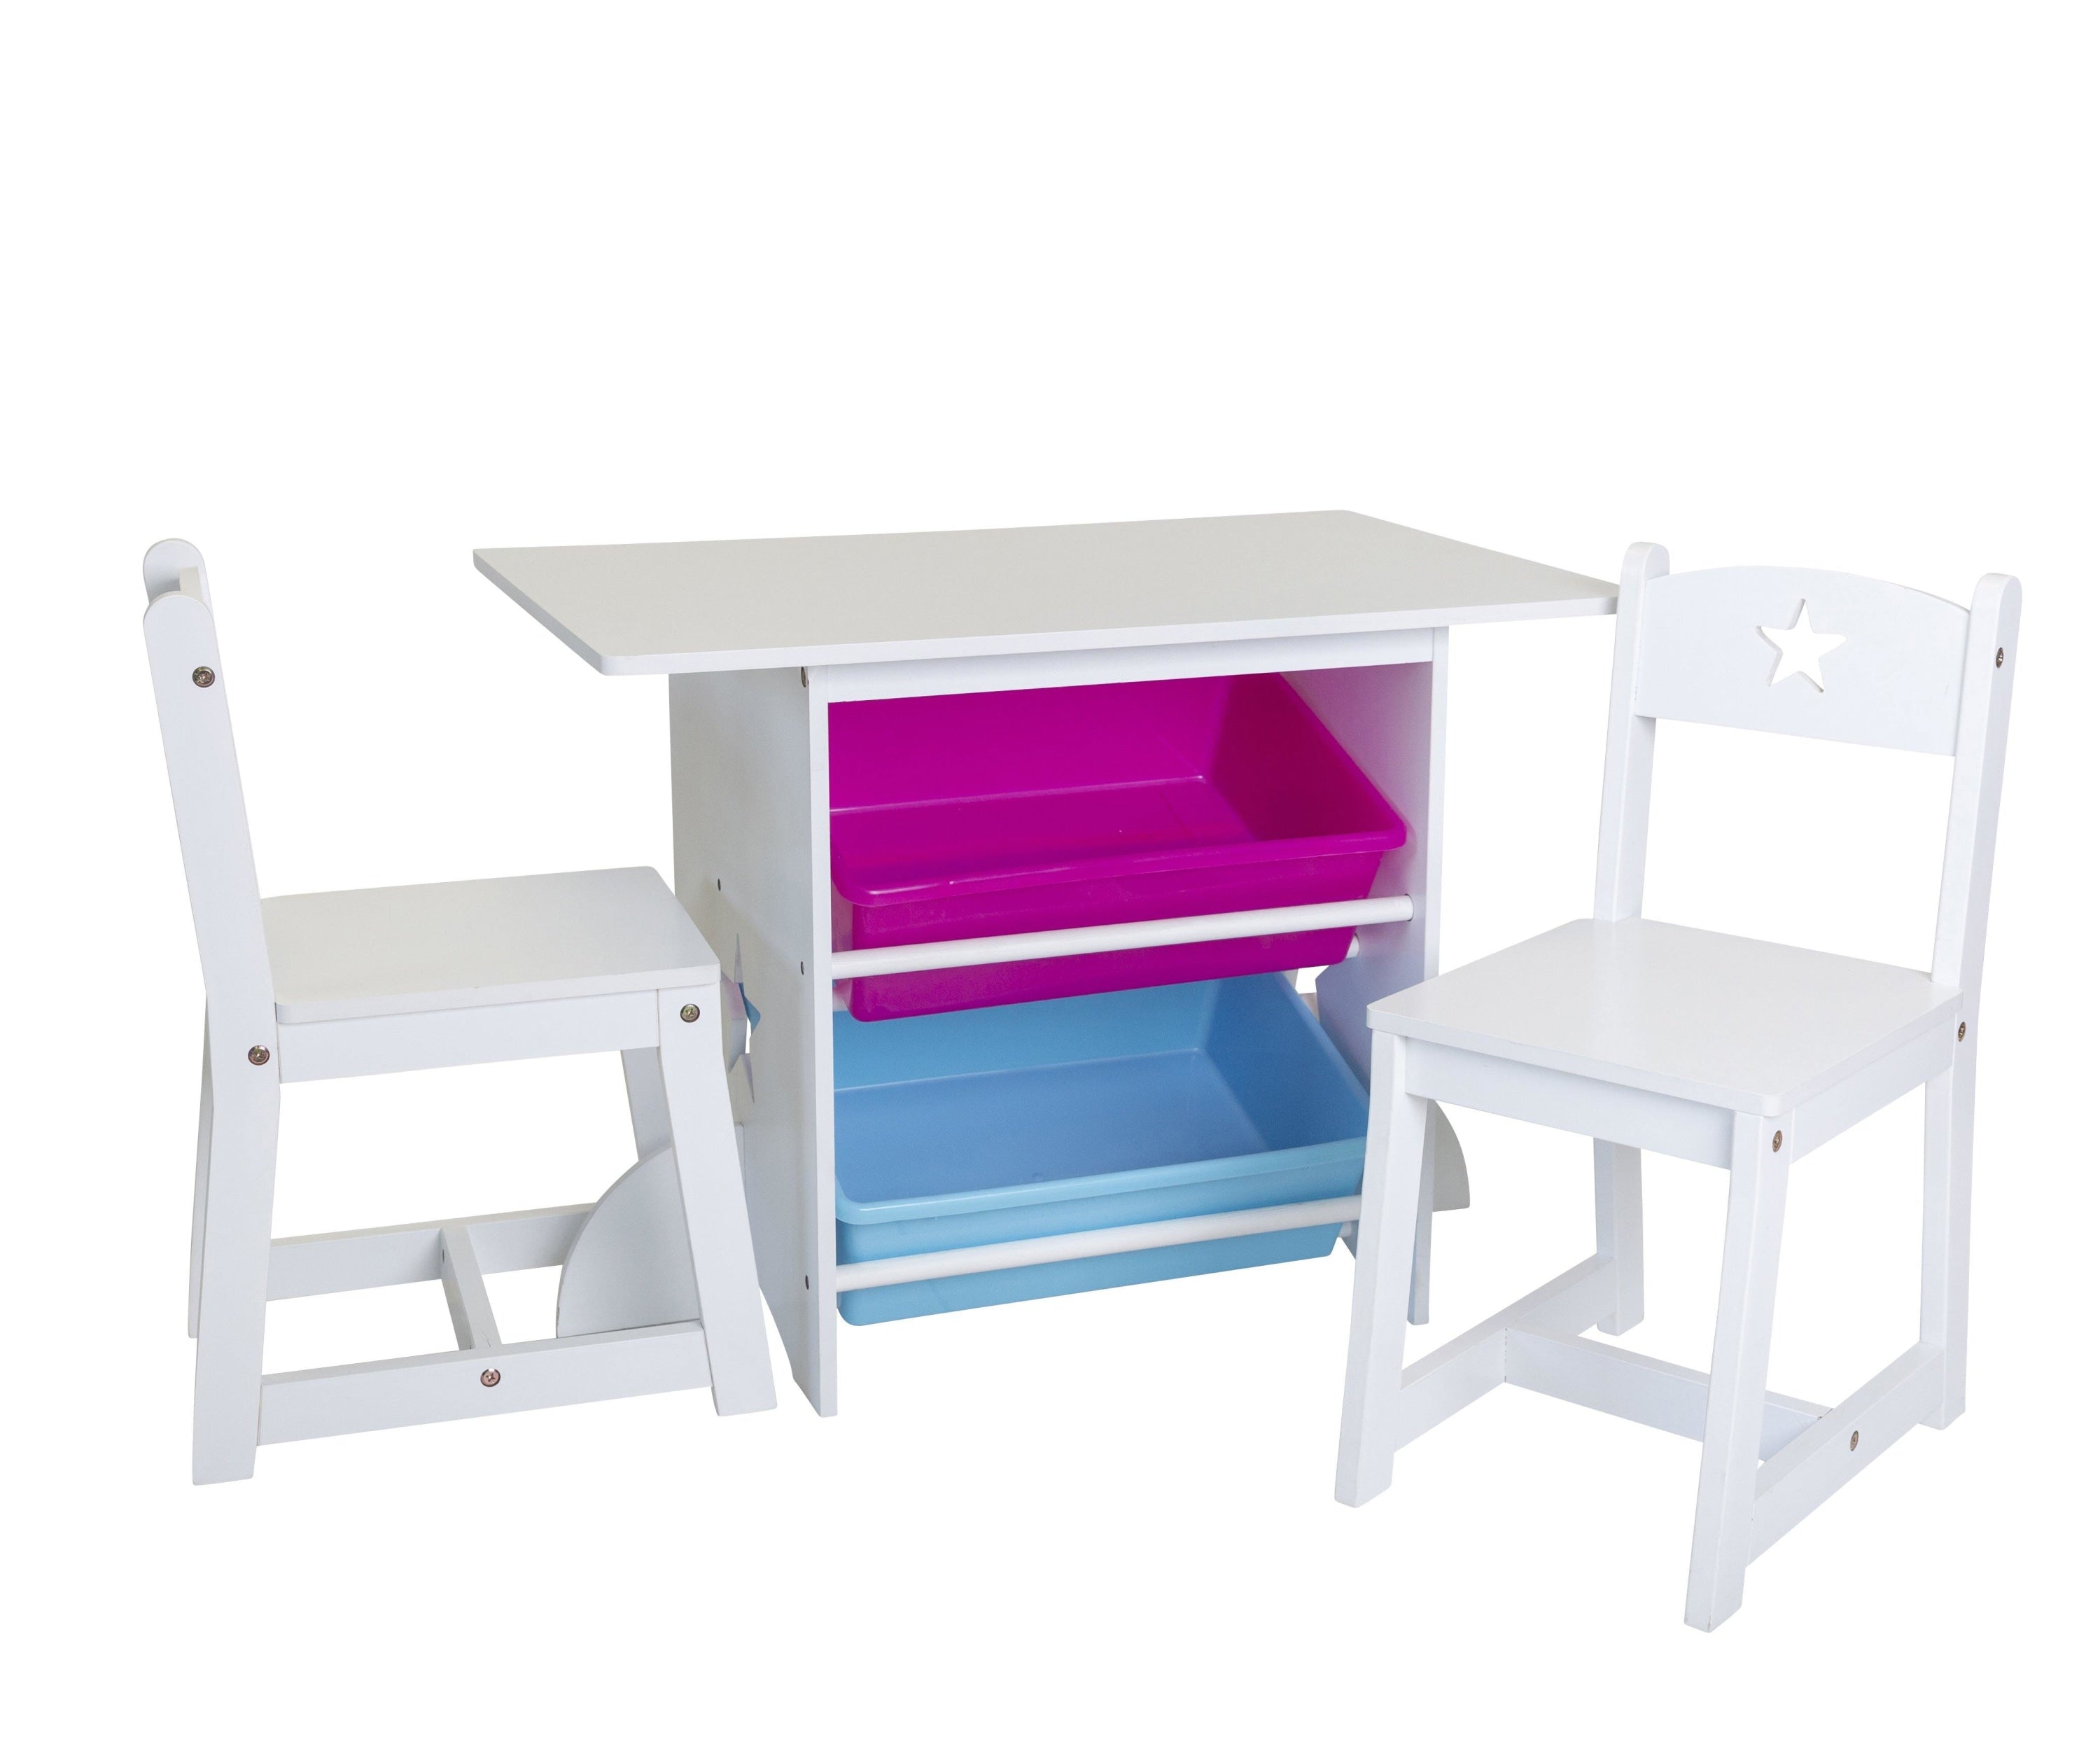 Kids Activity Play Table Chair Set with Storage Bins - Desk 